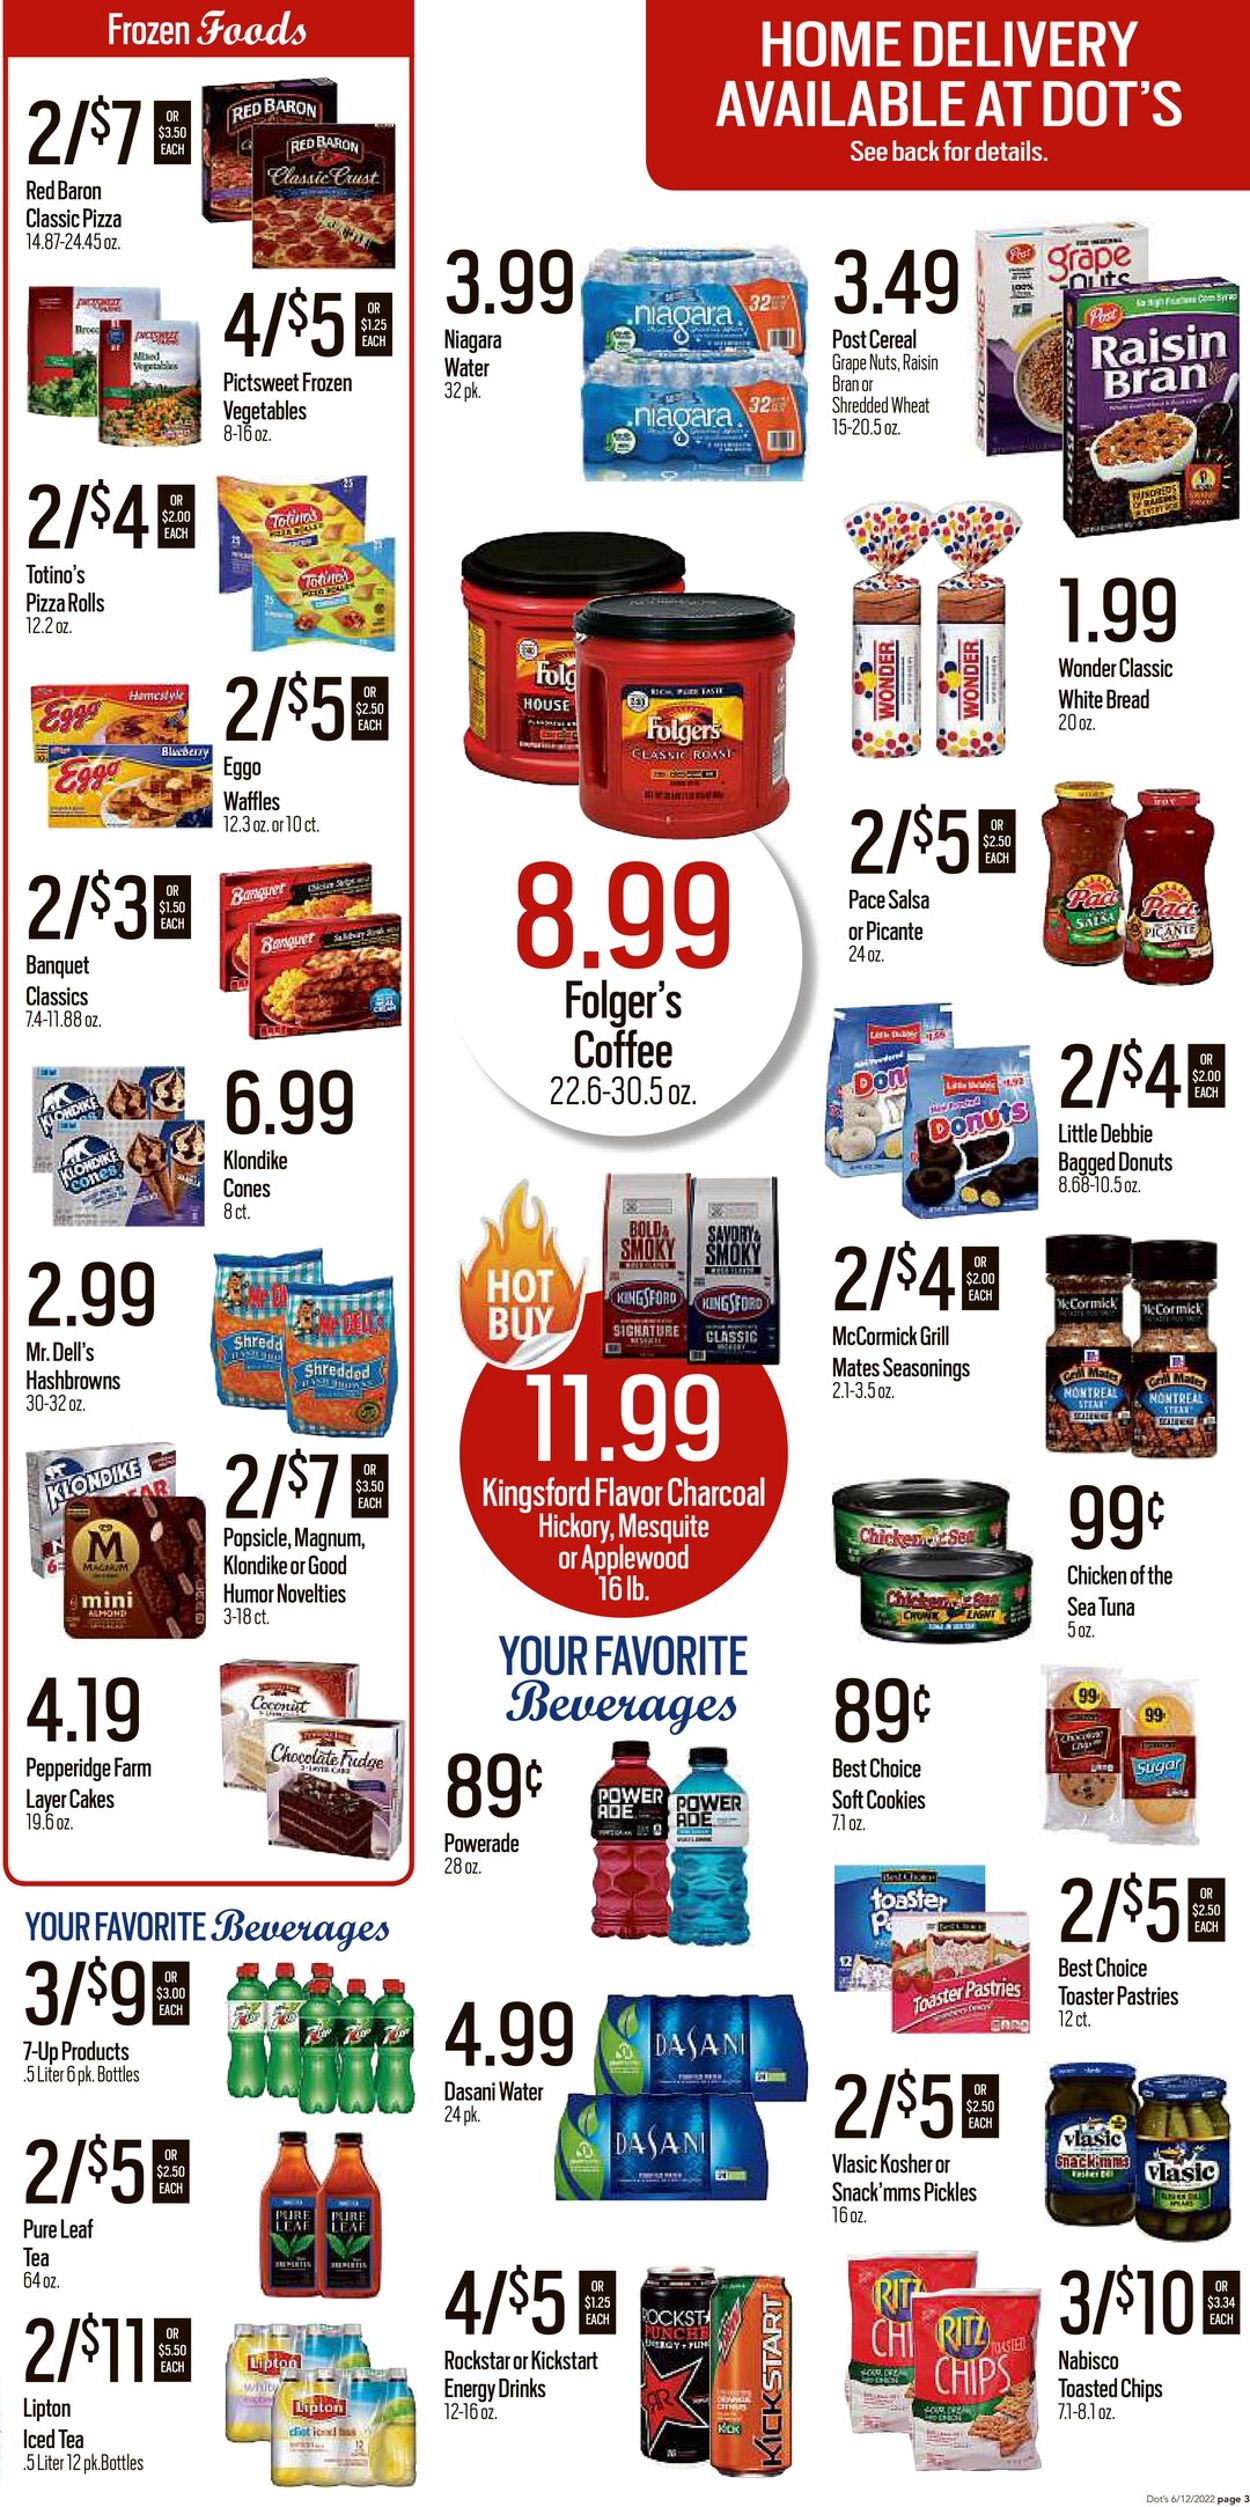 Dot's Market Ad from 06/13/2022